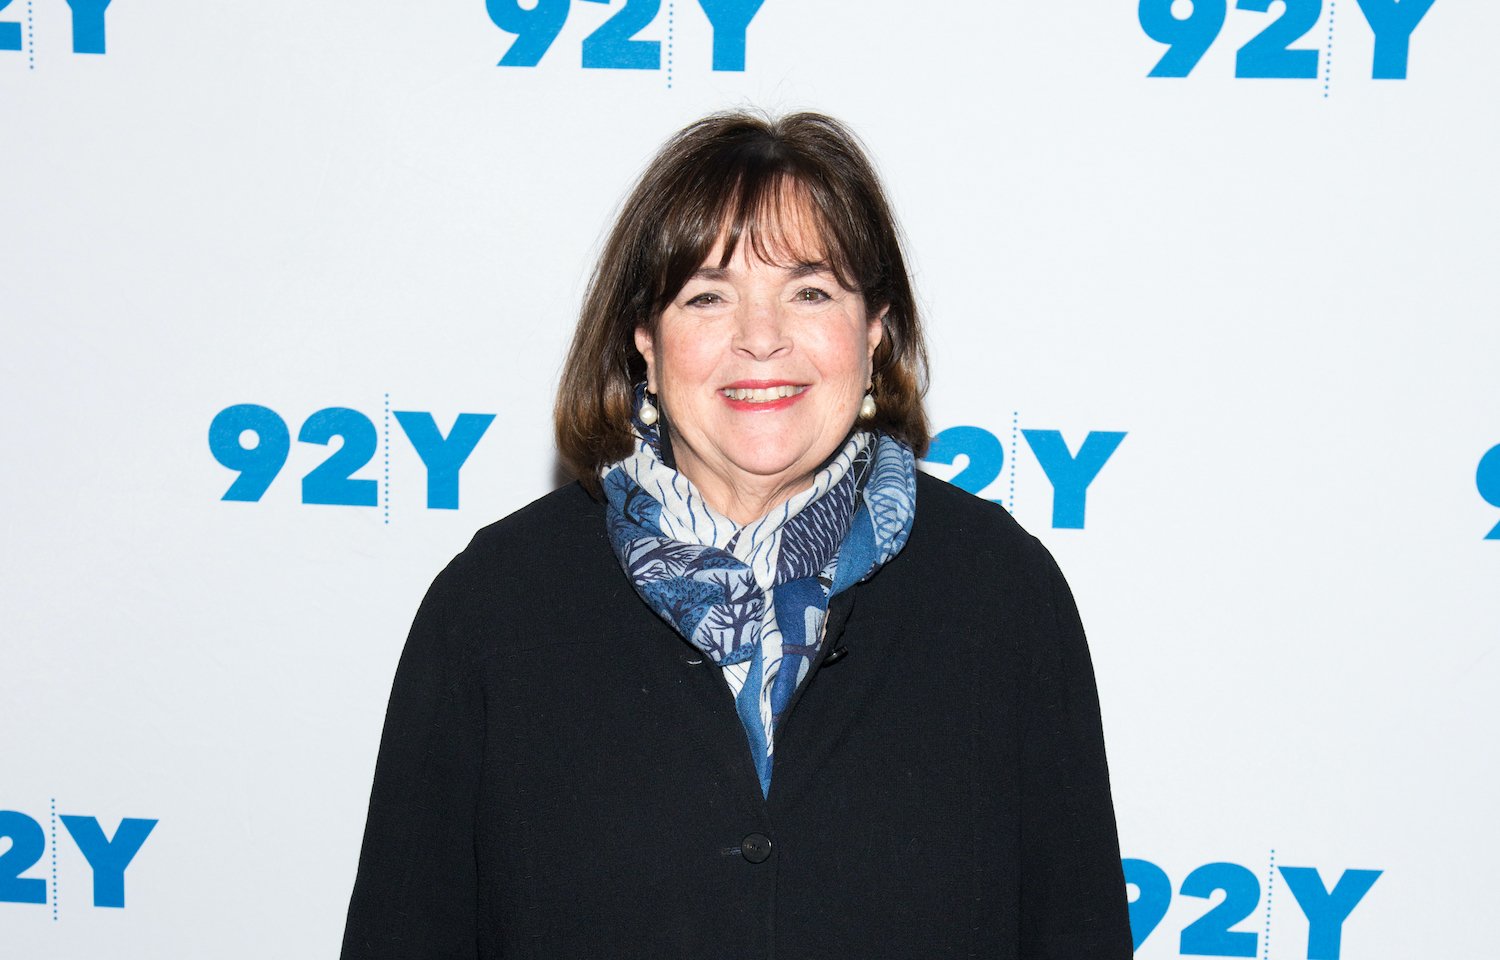 Ina Garten attends Ina Garten in Conversation with Danny Meyer on January 31, 2017 in New York City